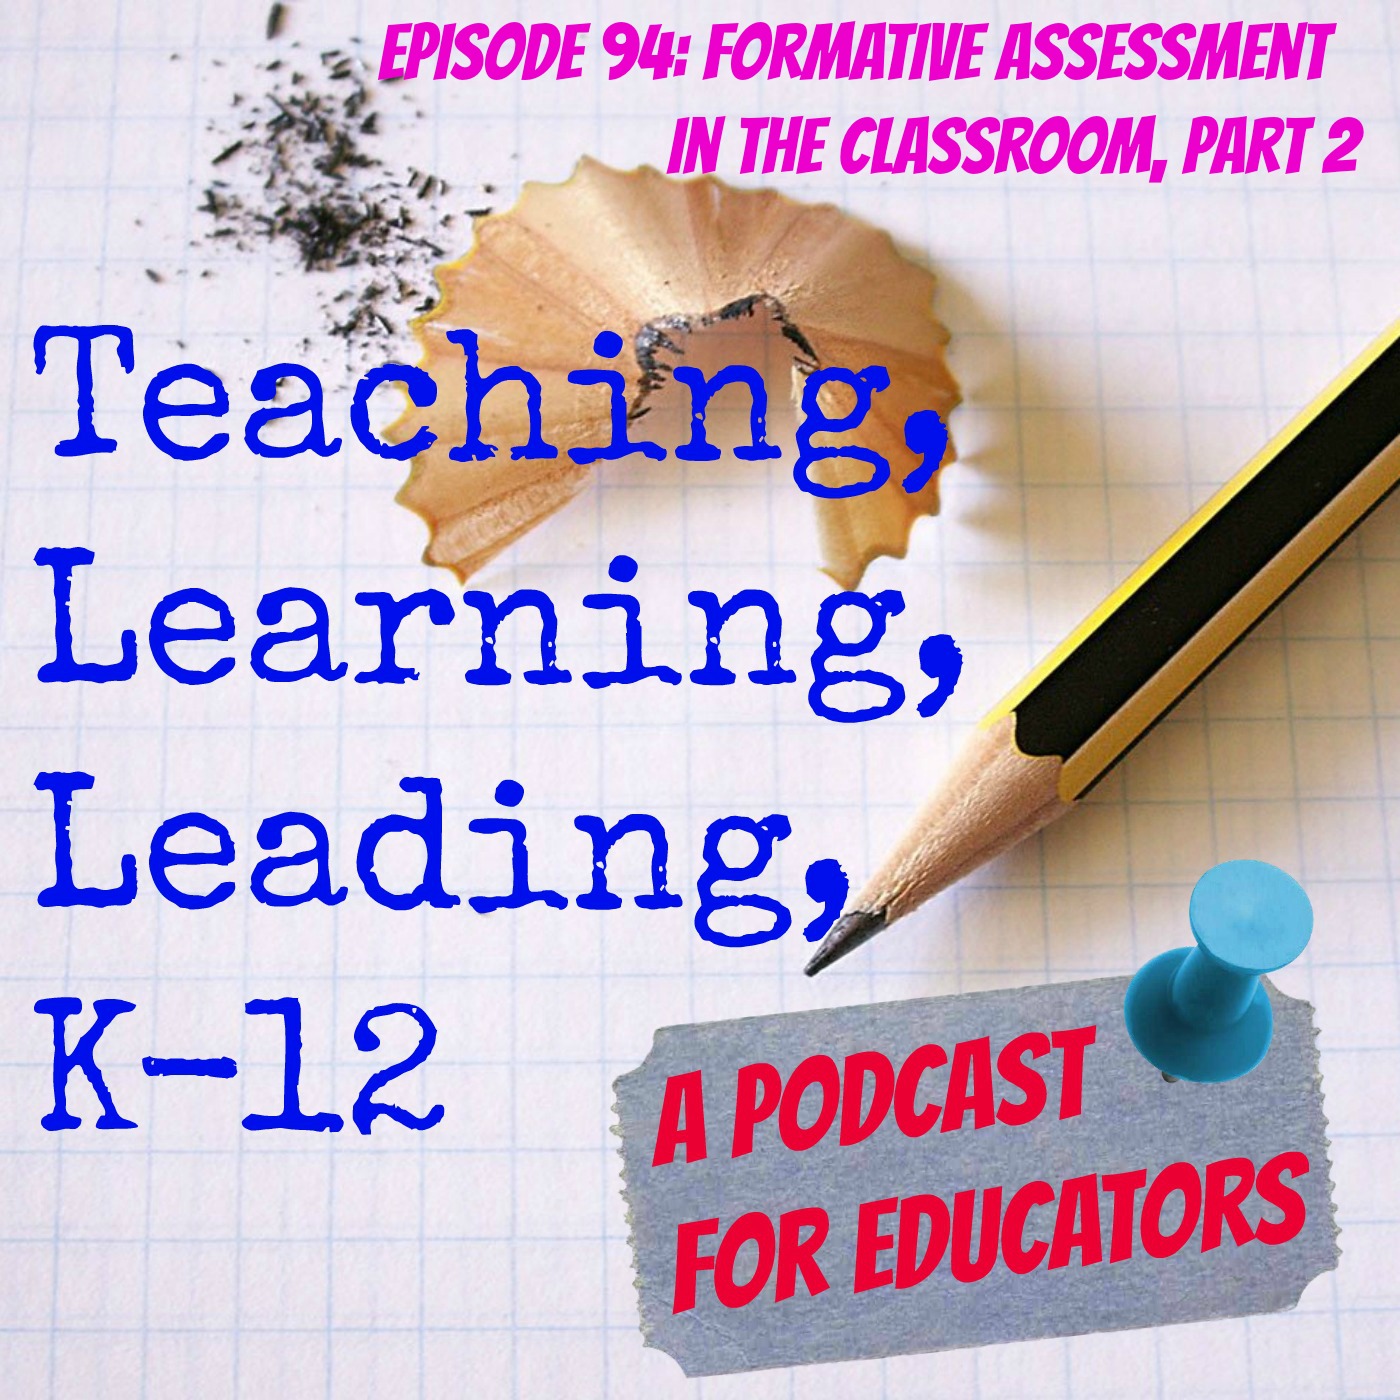 Episode 94: Formative Assessment in the Classroom, Part 2 Image